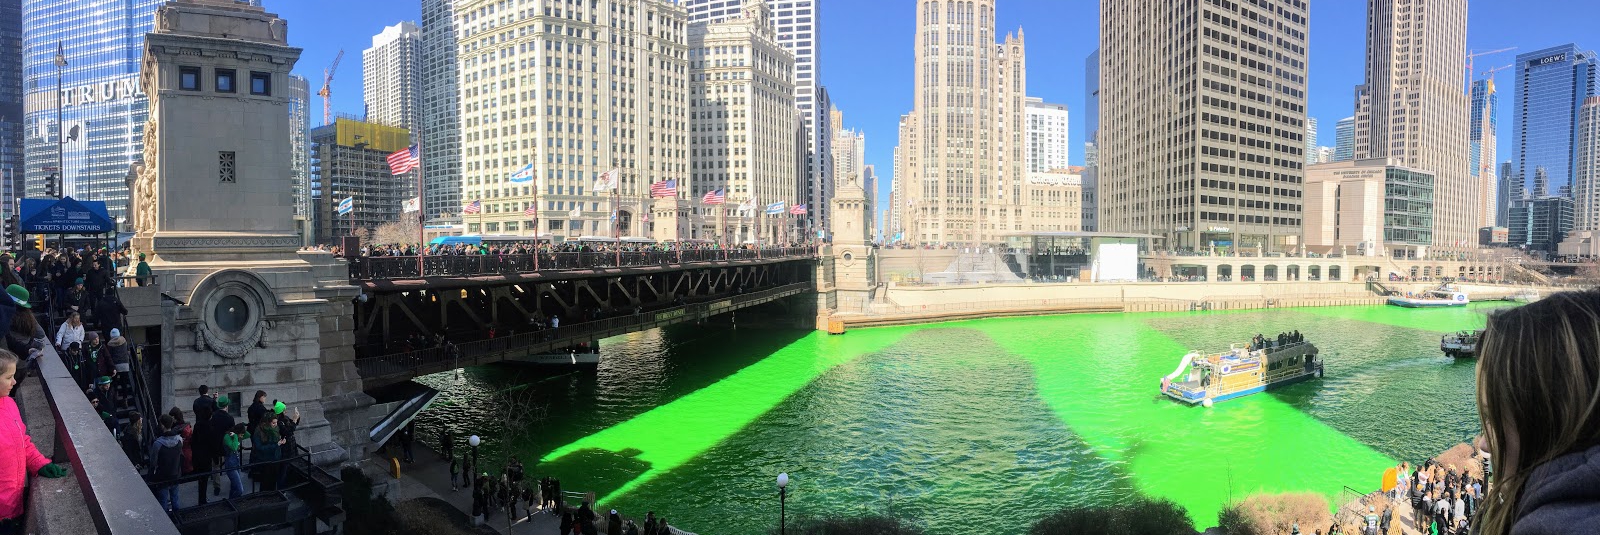 Chicago Named #1 City to Celebrate St. Patrick’s Day